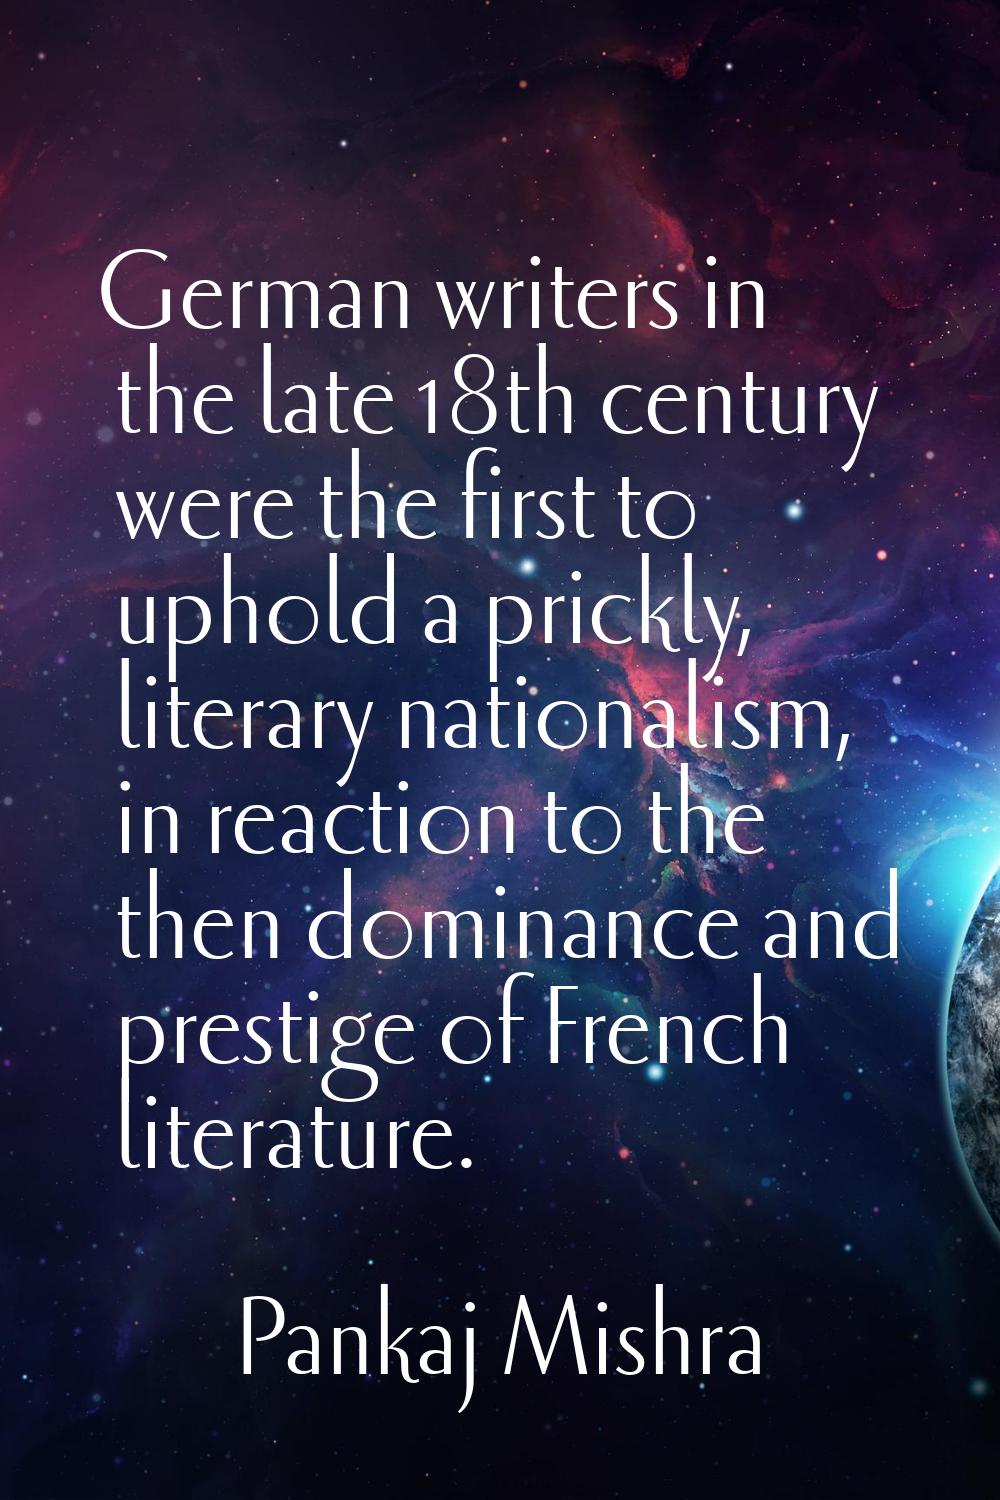 German writers in the late 18th century were the first to uphold a prickly, literary nationalism, i